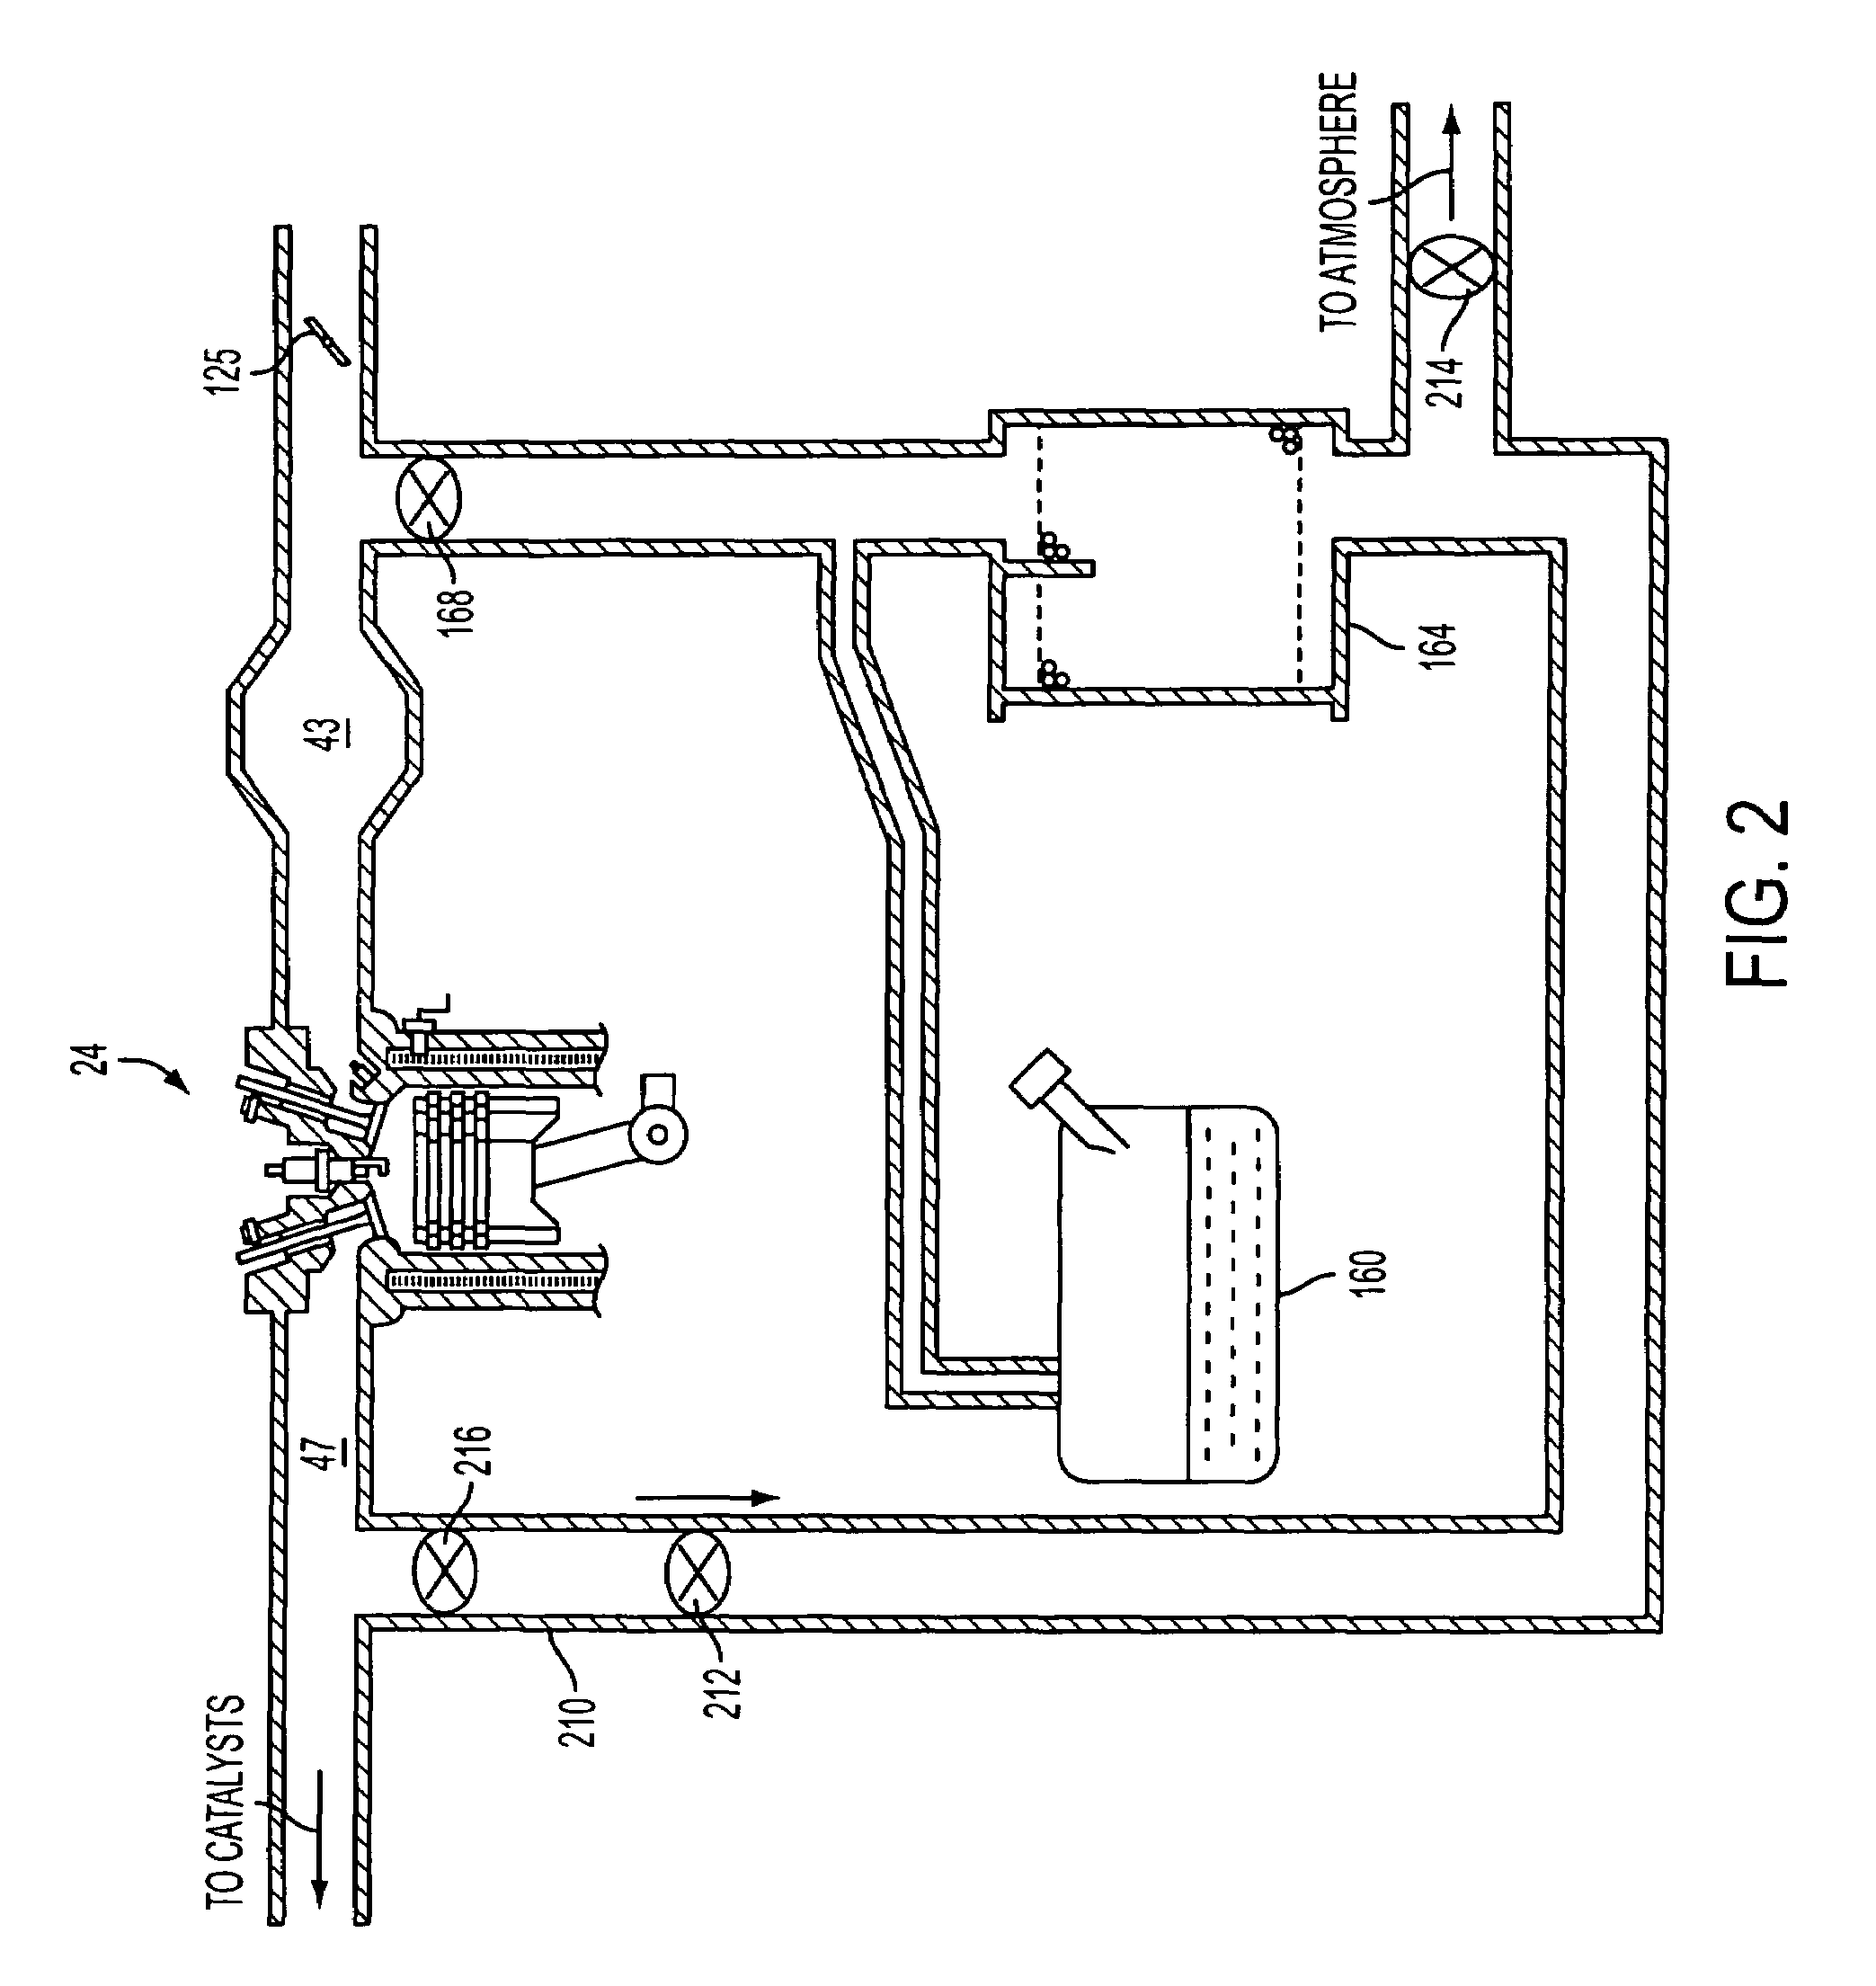 System and method for purging fuel vapors using exhaust gas